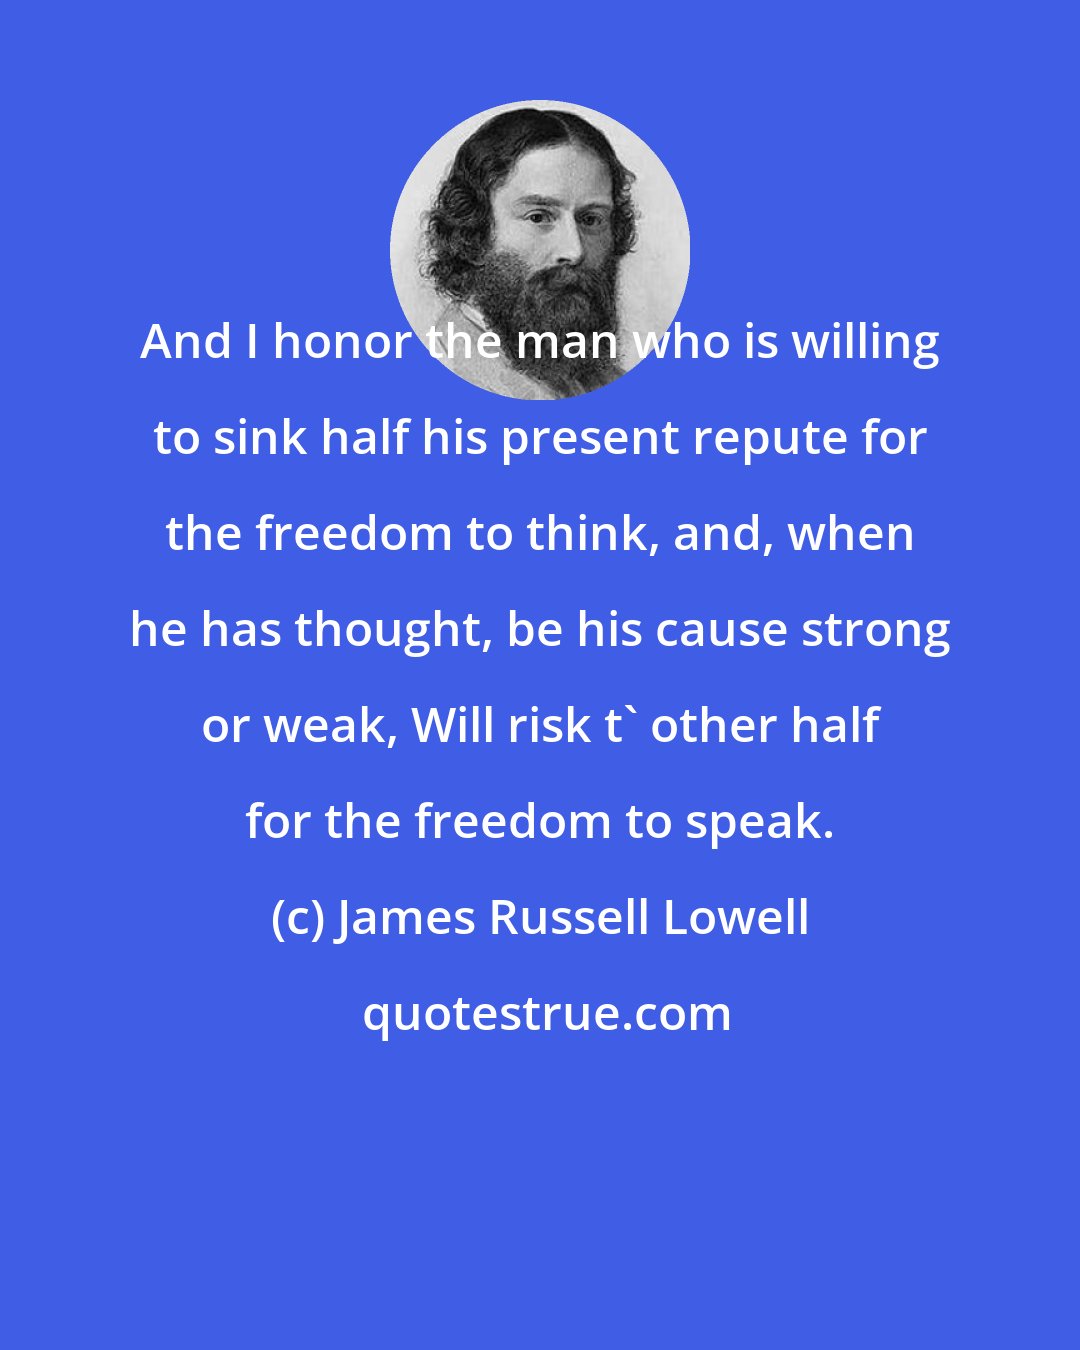 James Russell Lowell: And I honor the man who is willing to sink half his present repute for the freedom to think, and, when he has thought, be his cause strong or weak, Will risk t' other half for the freedom to speak.